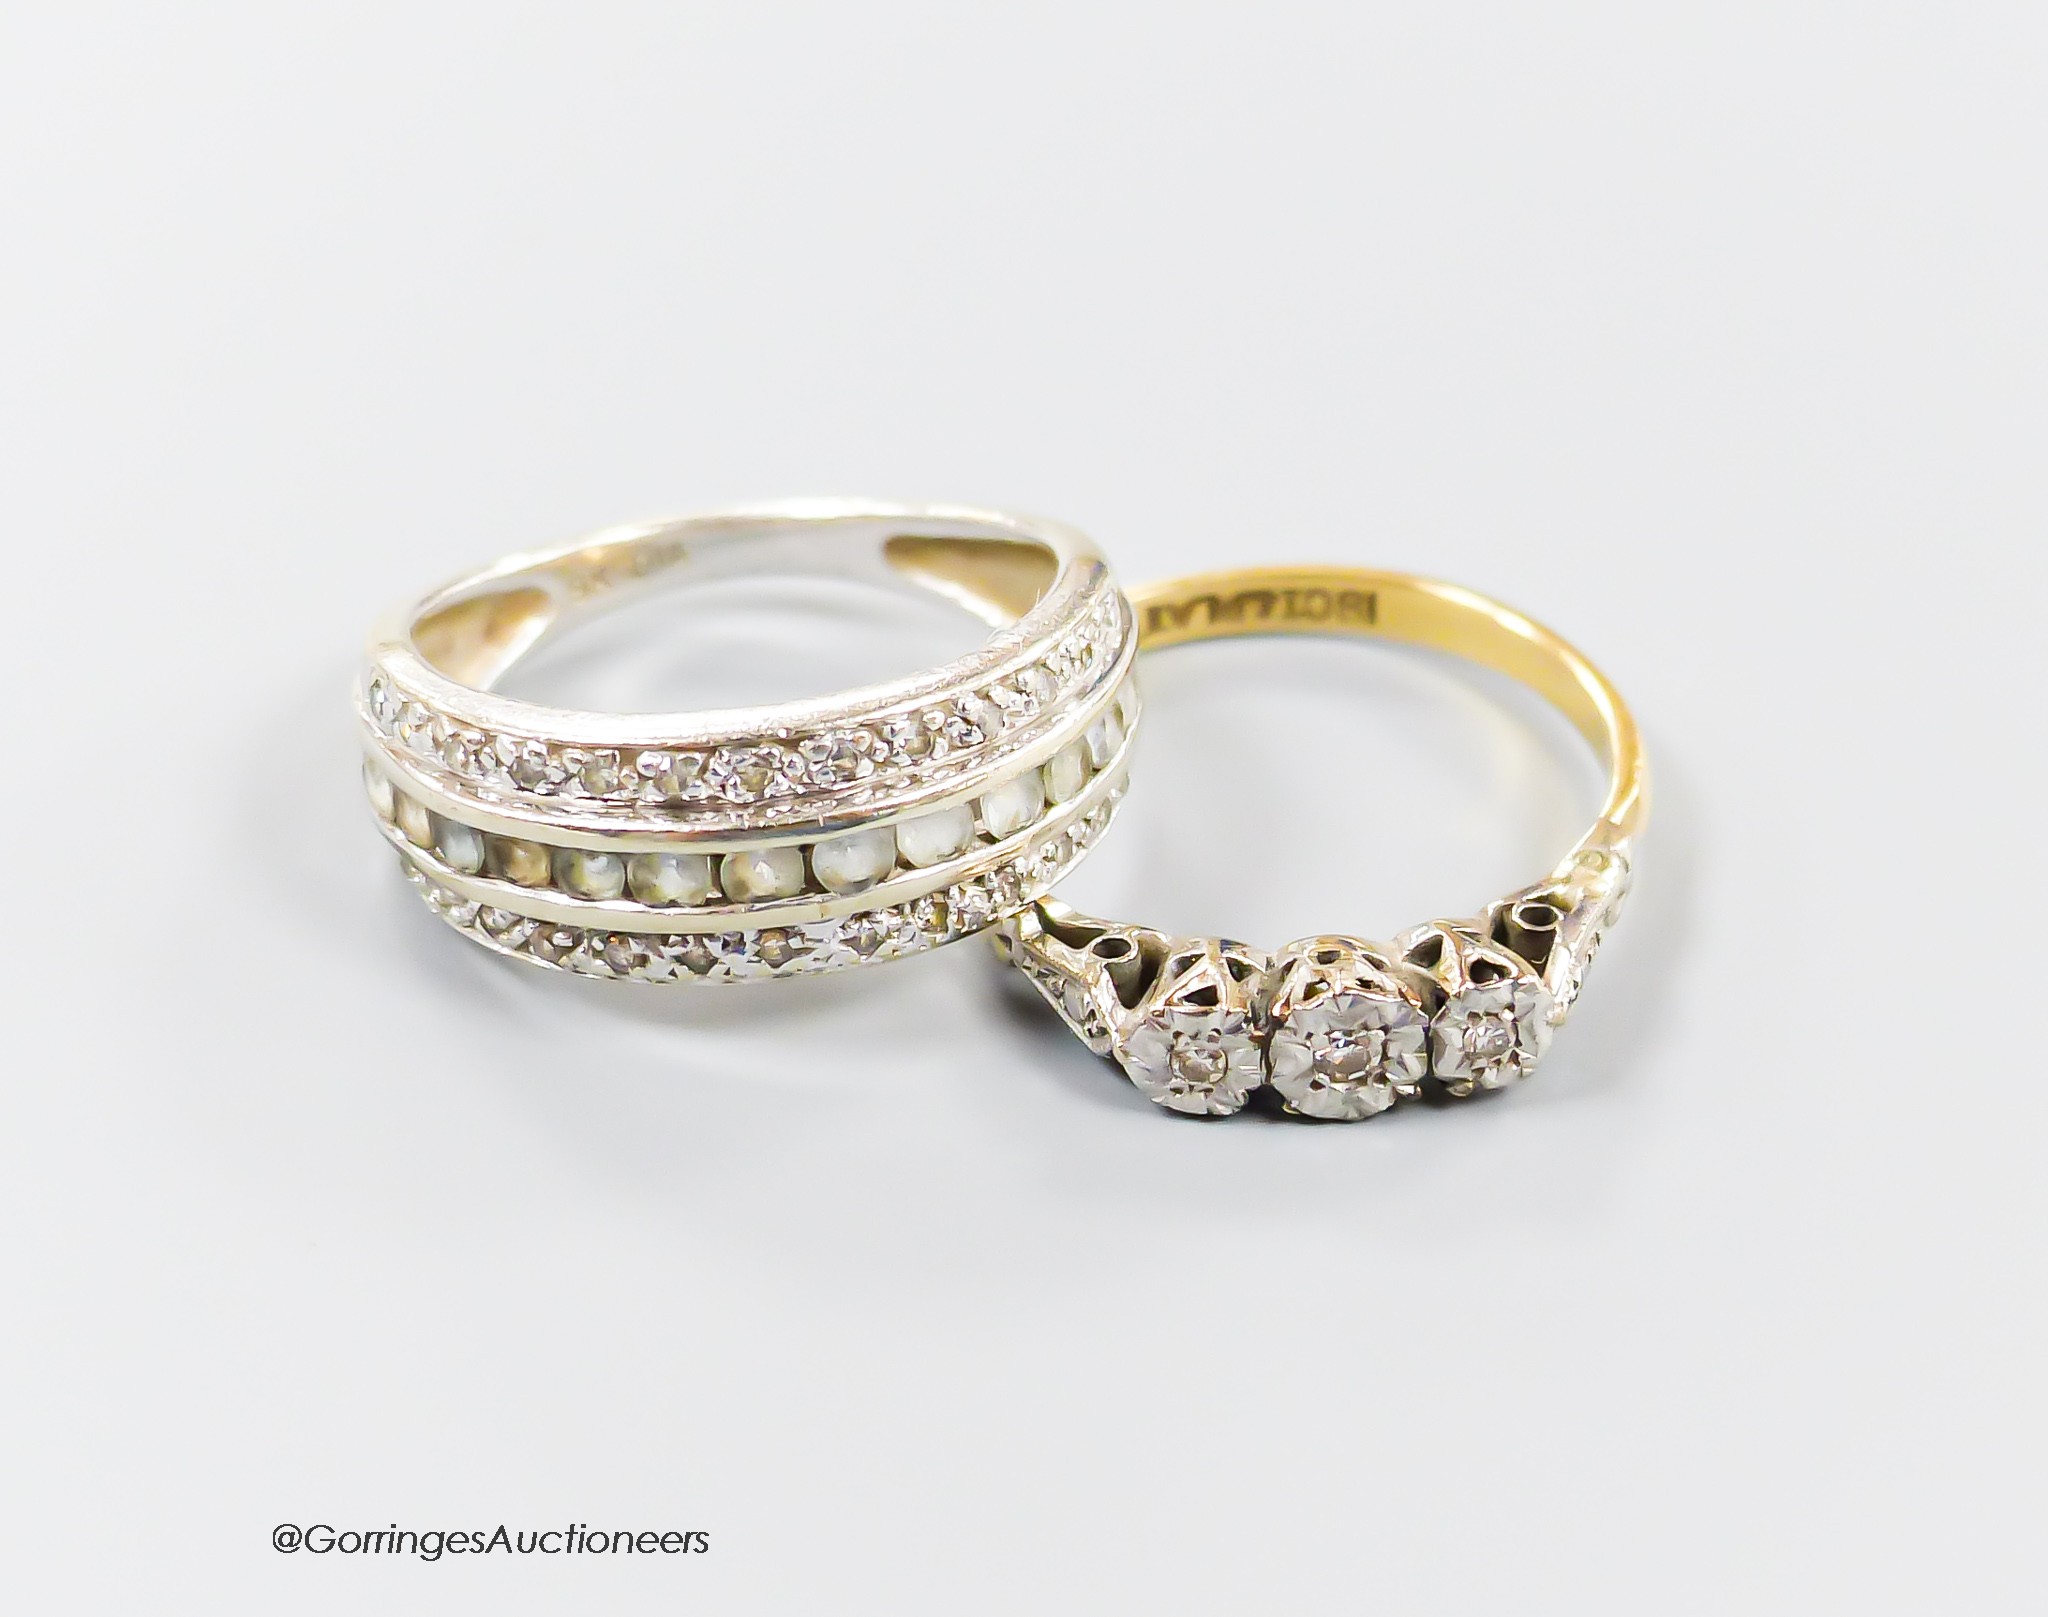 An 18ct & plat, illusion set three stone diamond ring, size M, gross 2.2 grams and a 9ct gem set ring, gross 2.9 grams.